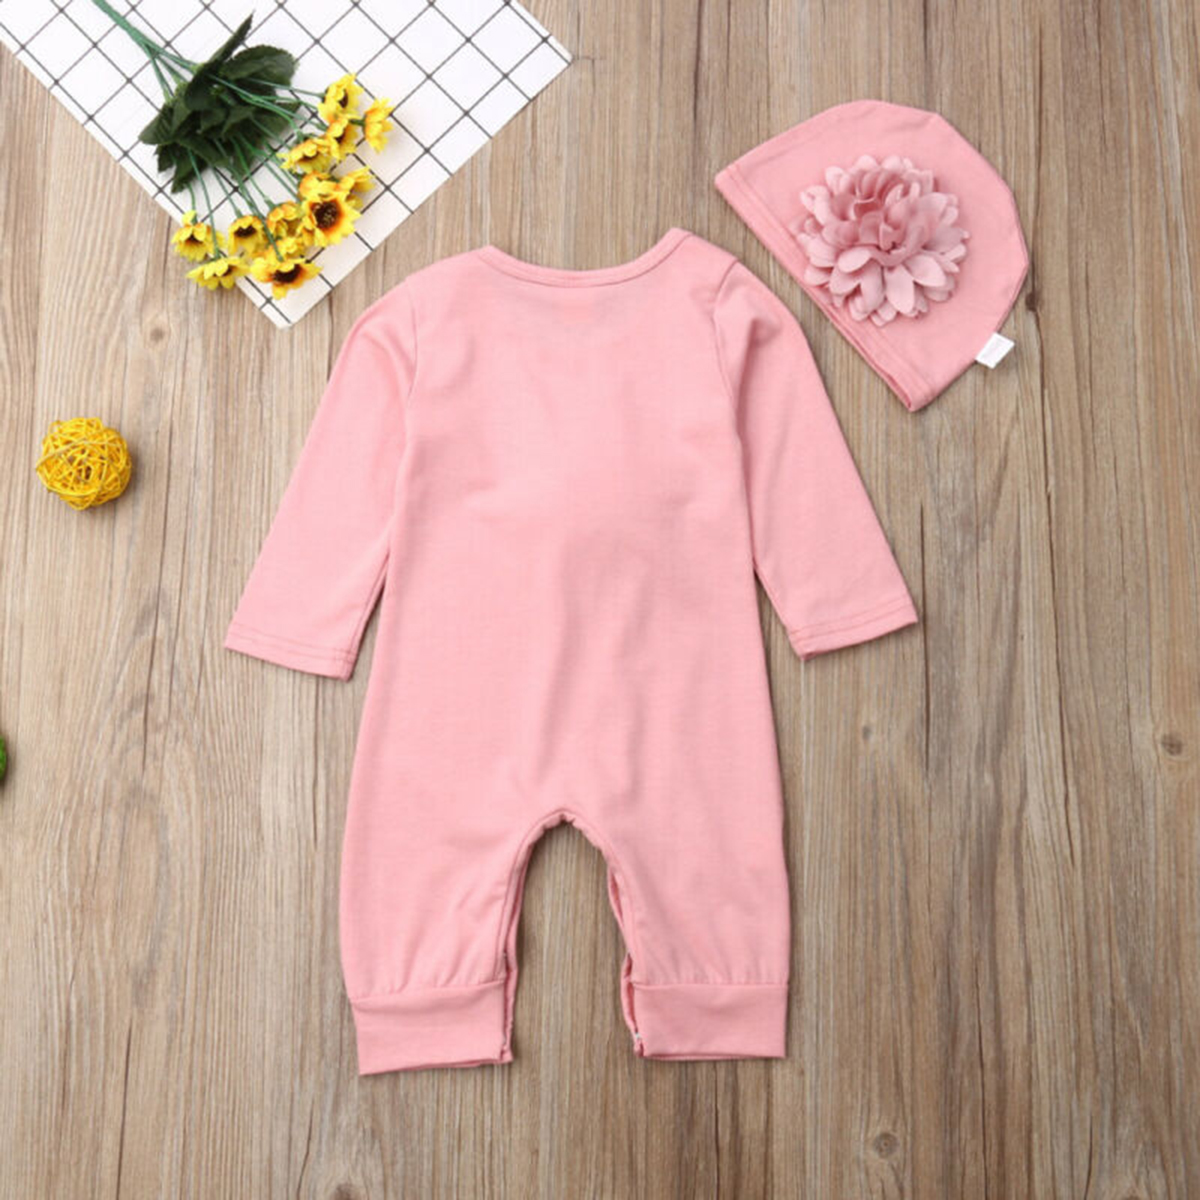 Spring-Autumn Newborn Baby Cotton Clothing Romper Boys Animal Costumes Boutique Pajama Roupa for Baby Christmas Gift 3